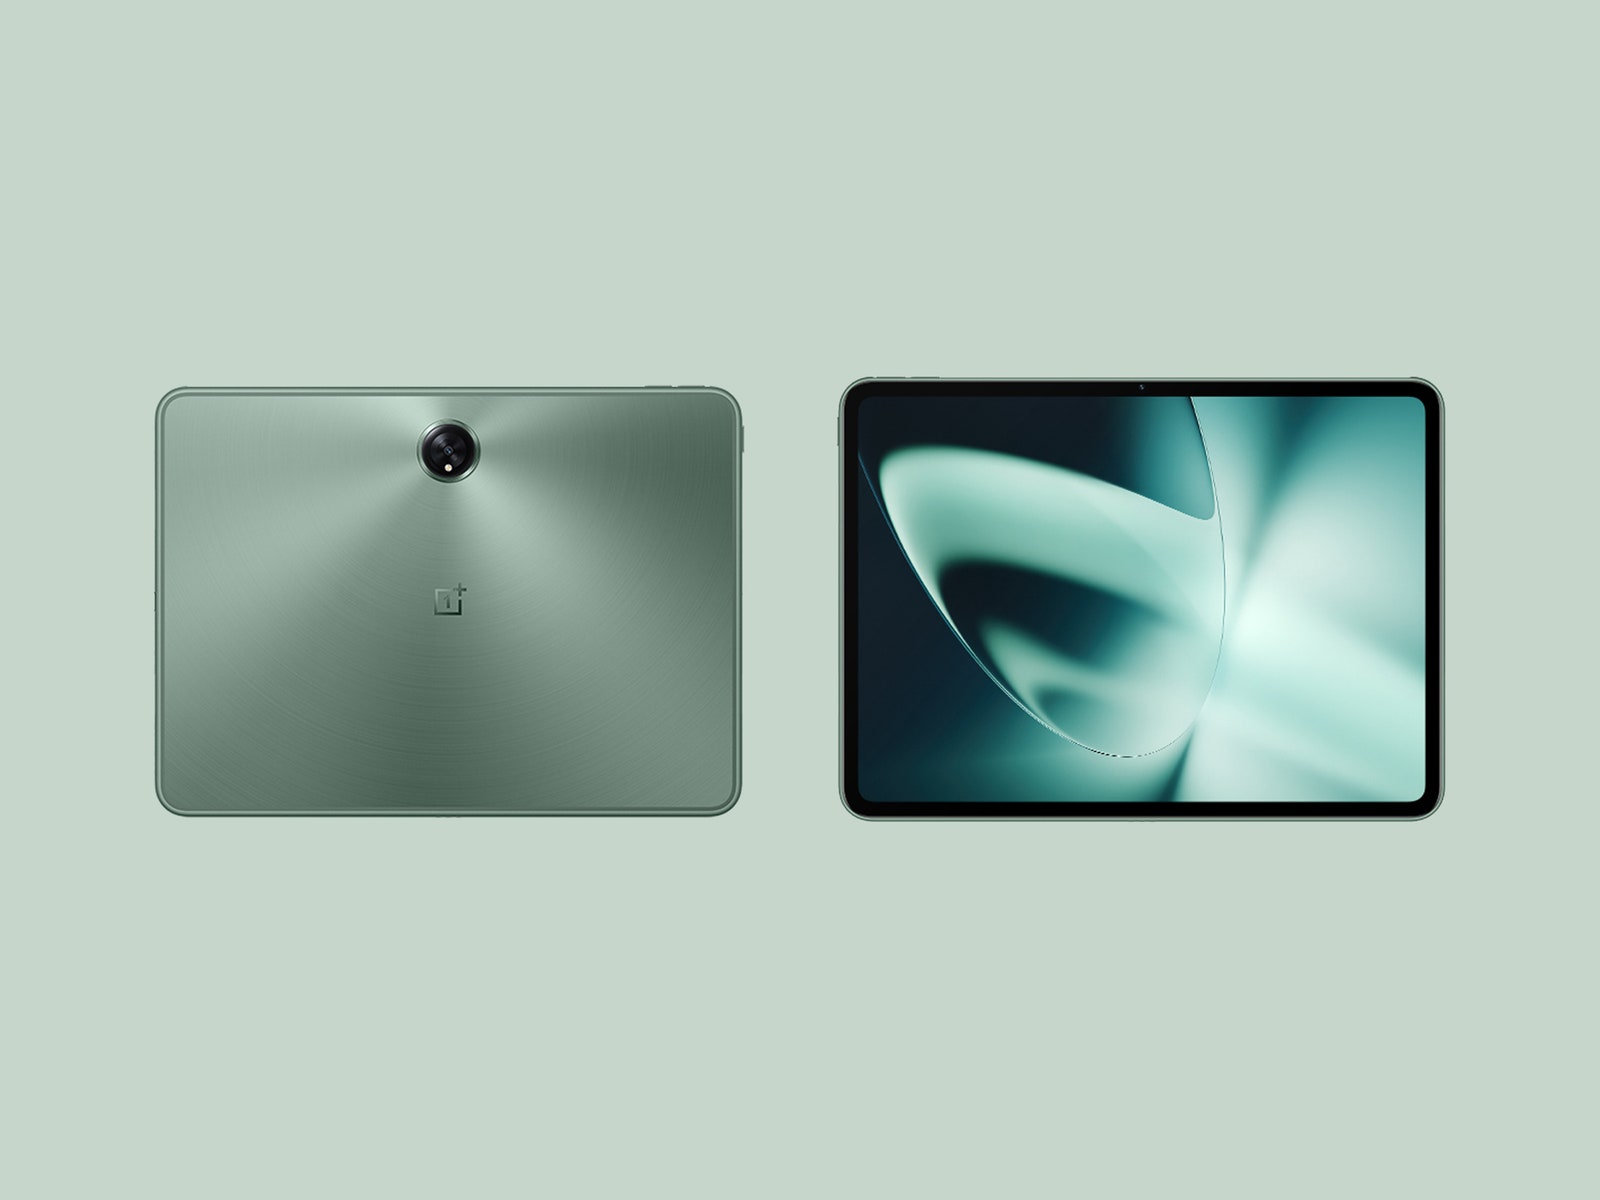 Front and rear view of the OnePlus Pad